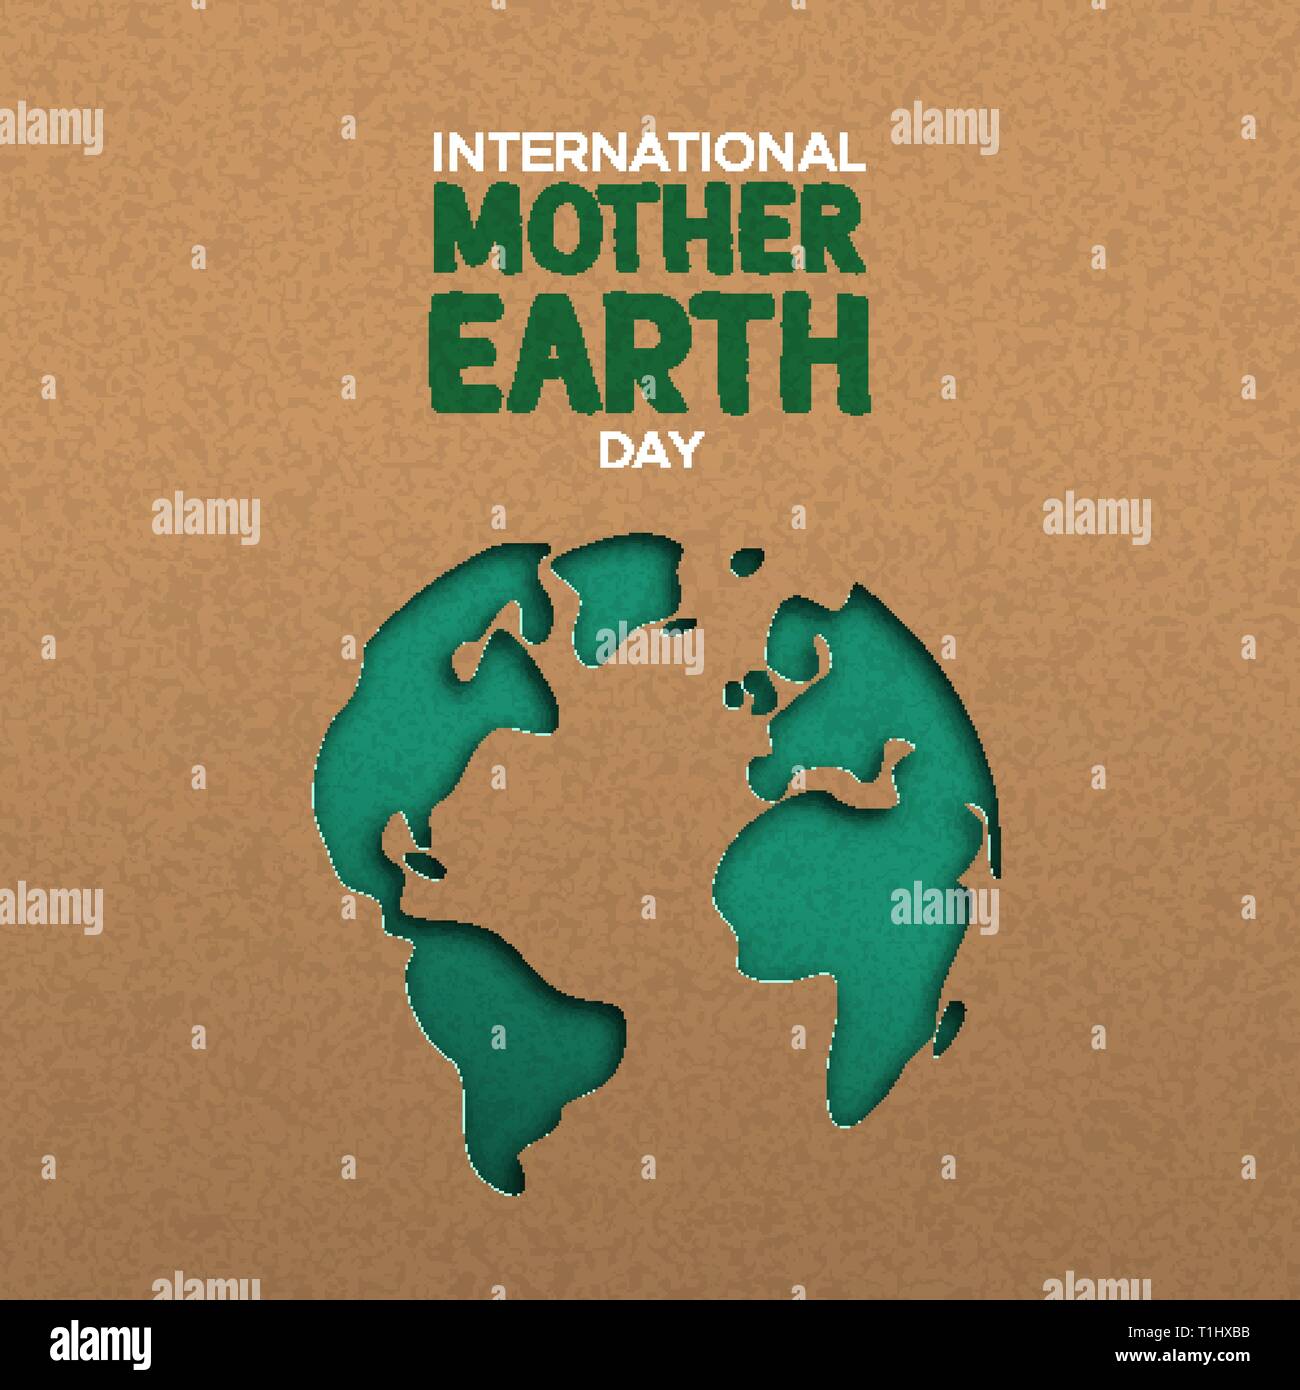 International Mother Earth Day illustration of green papercut world map. Recycled paper cutout for planet conservation awareness. Stock Vector